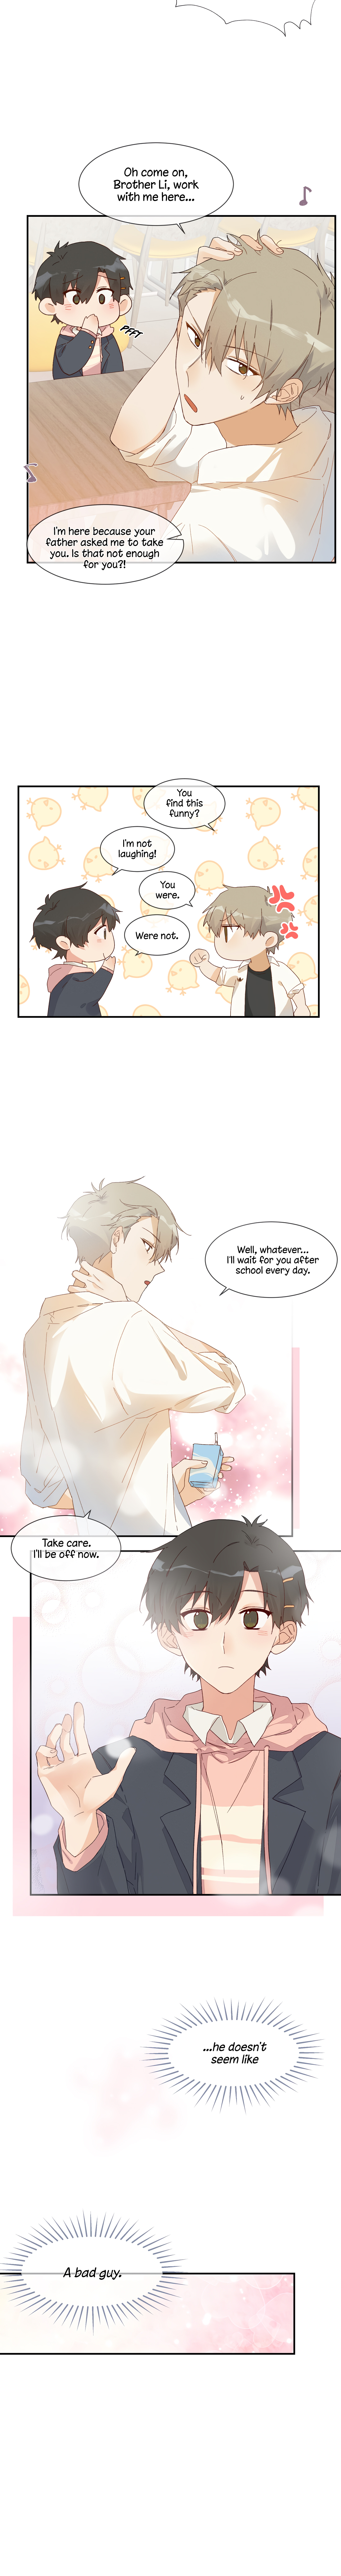 I Want to Hear Your Confession Ch. 21 I Only Want to See You (?)